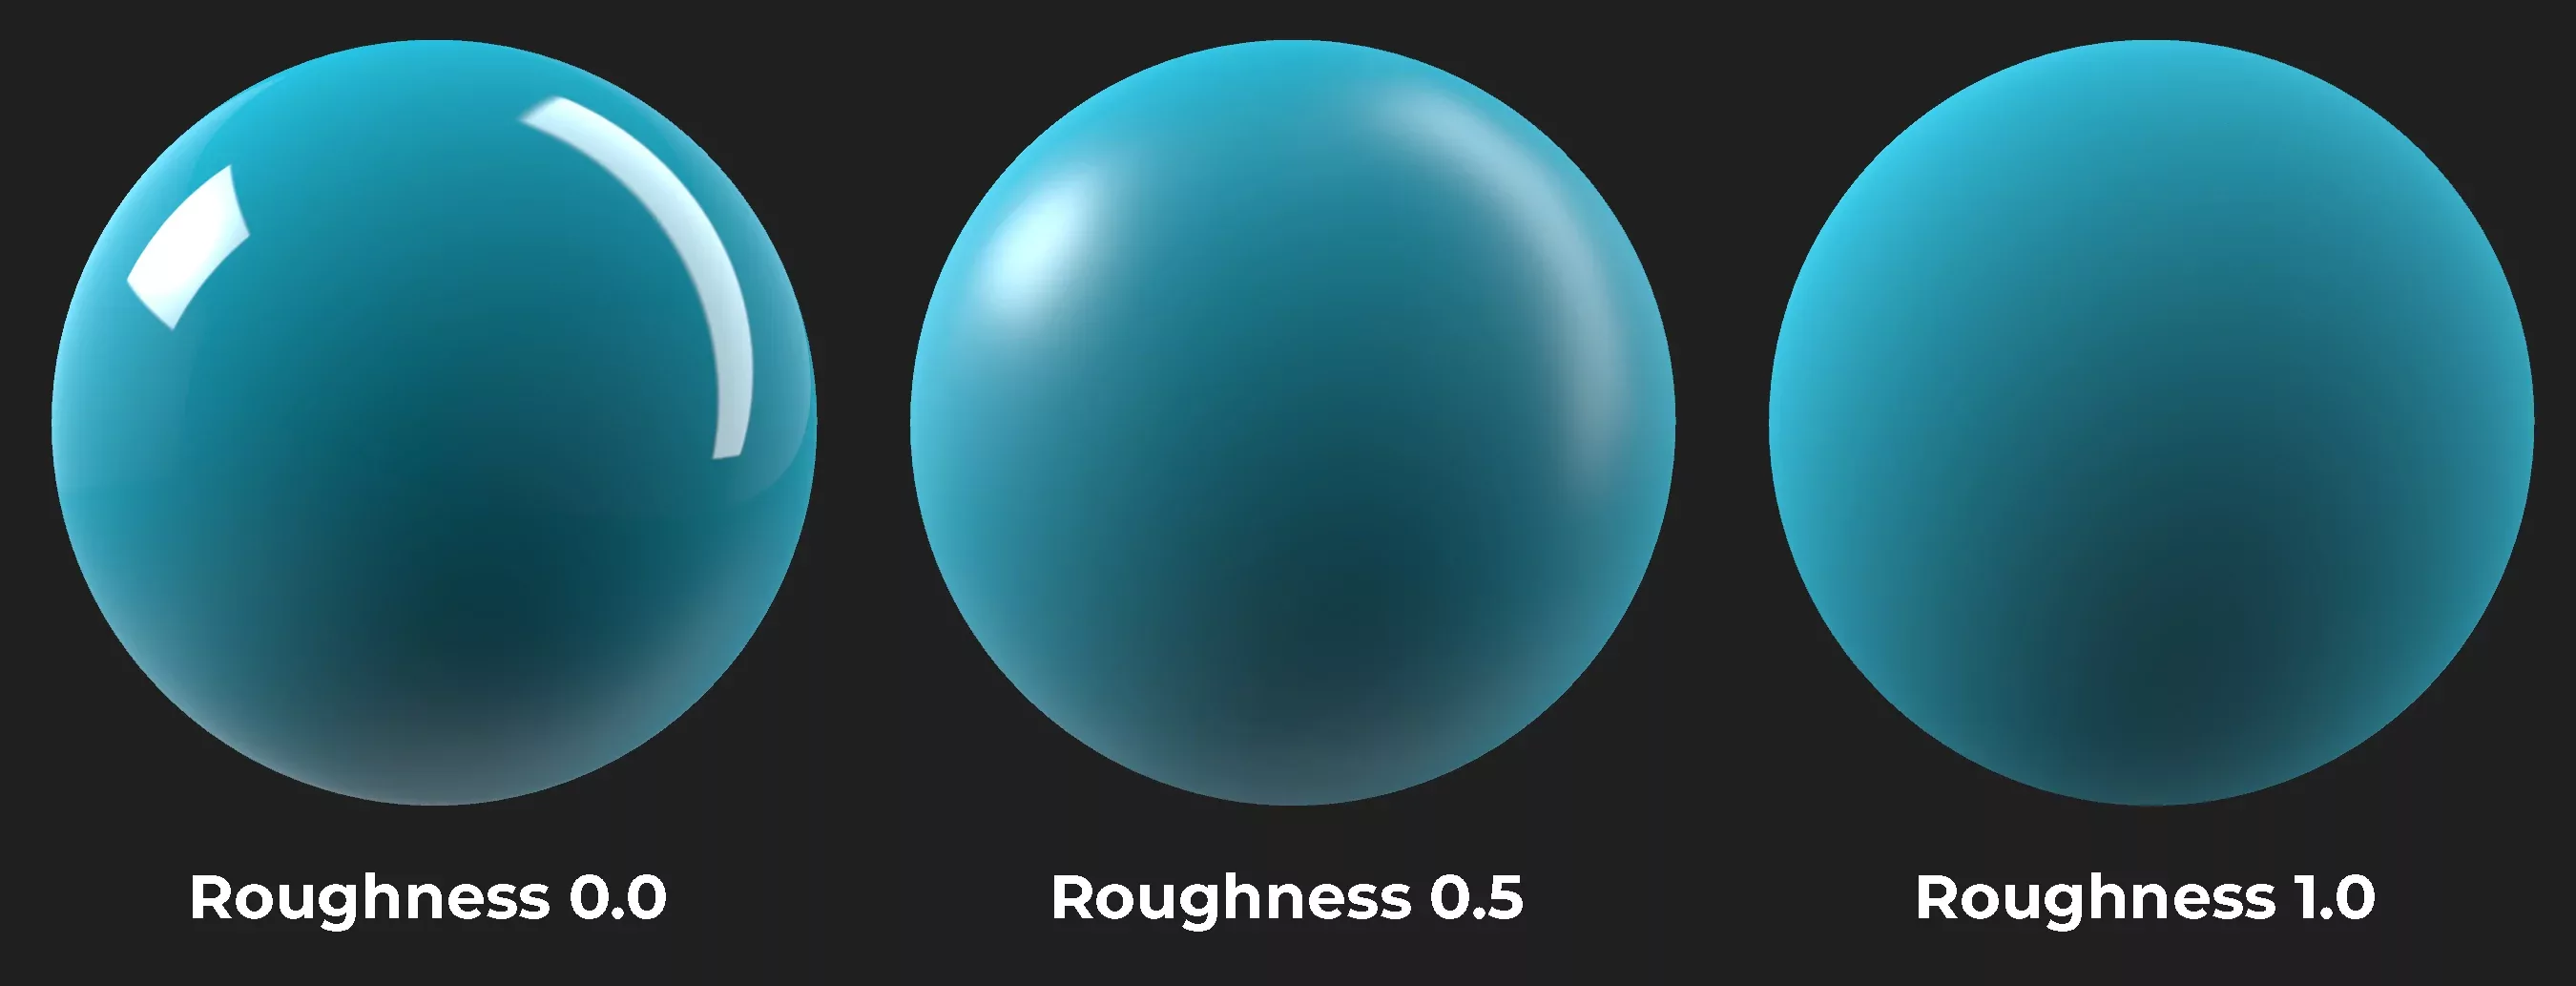 An example of a roughness map showing how as you increase roughness, less light can reflect of an object.